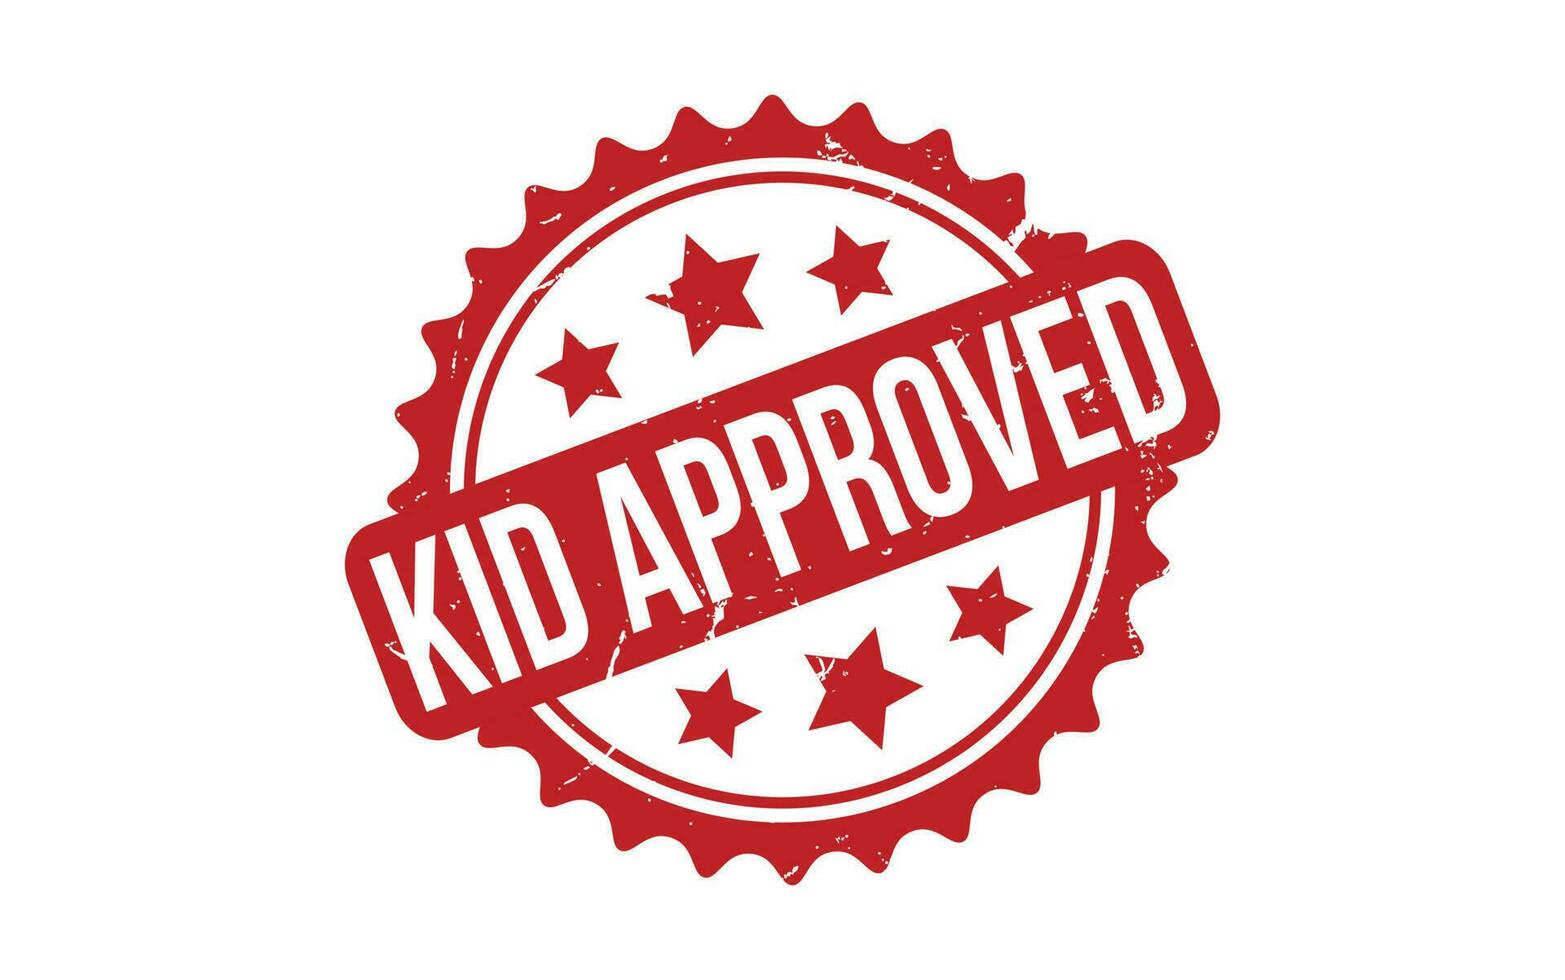 Red Kid Approved Rubber Stamp Seal Vector